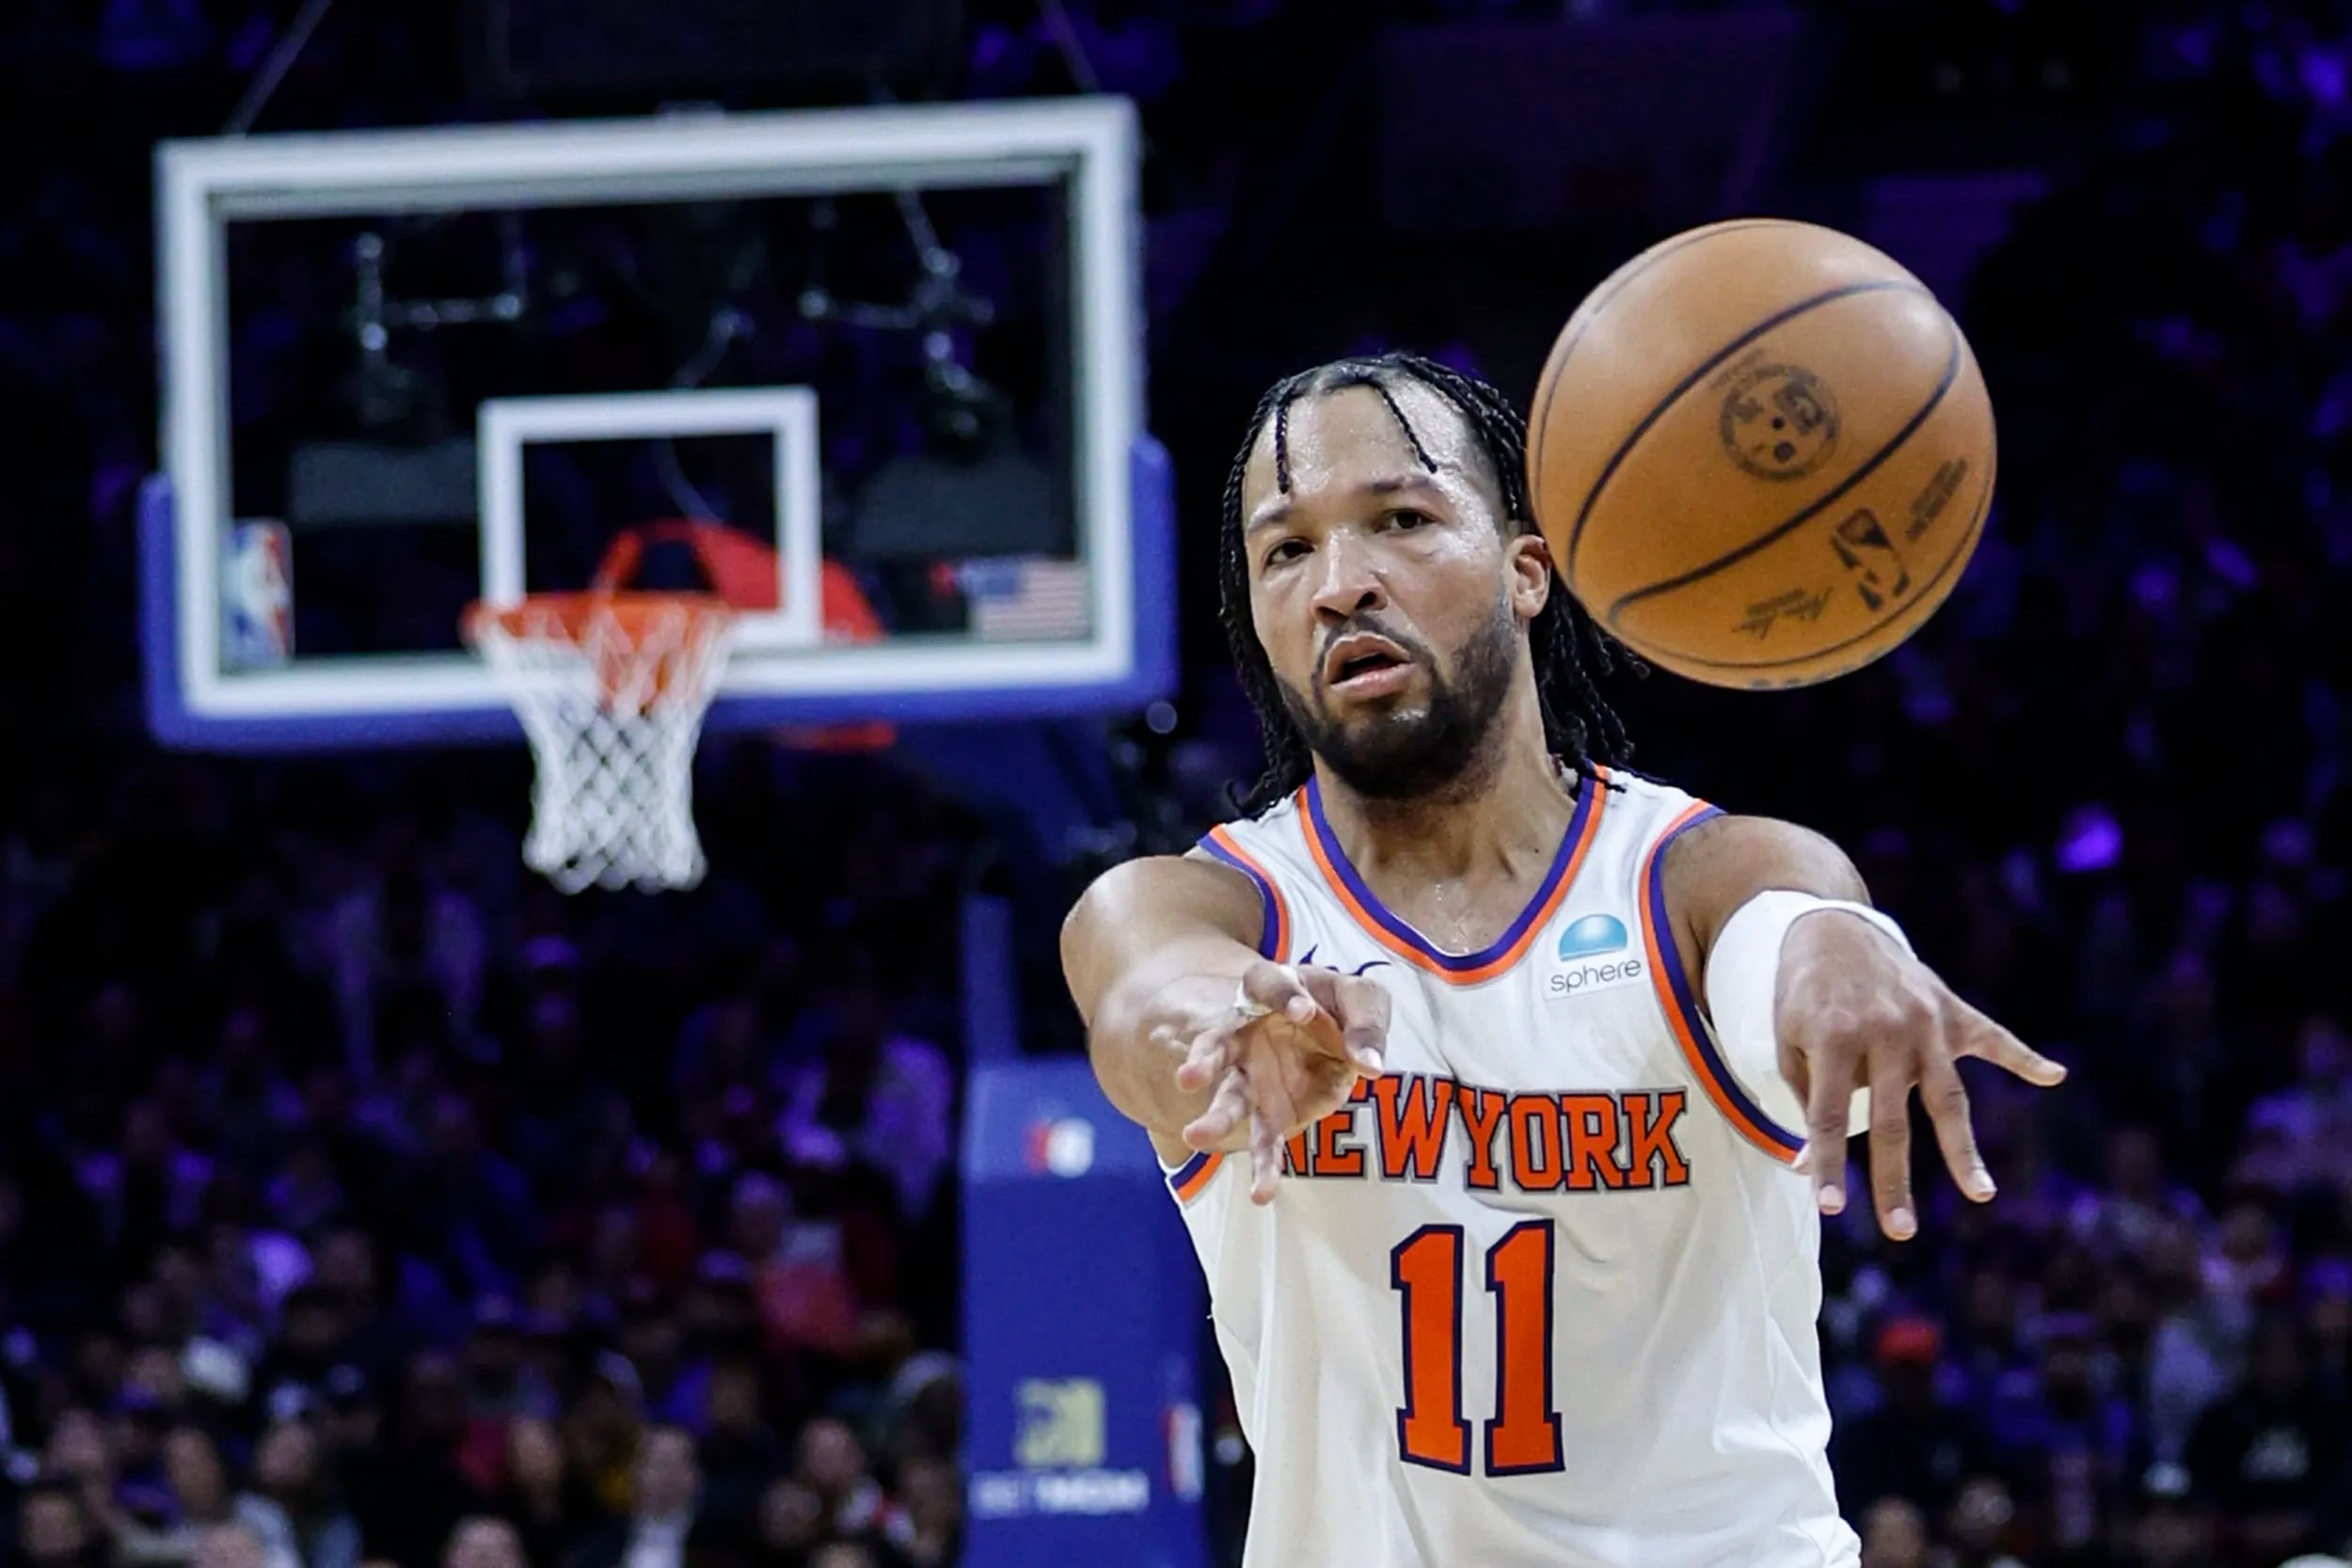 The Sixers could end up facing Jalen Brunson and the Knicks in the first round of the NBA playoffs.
